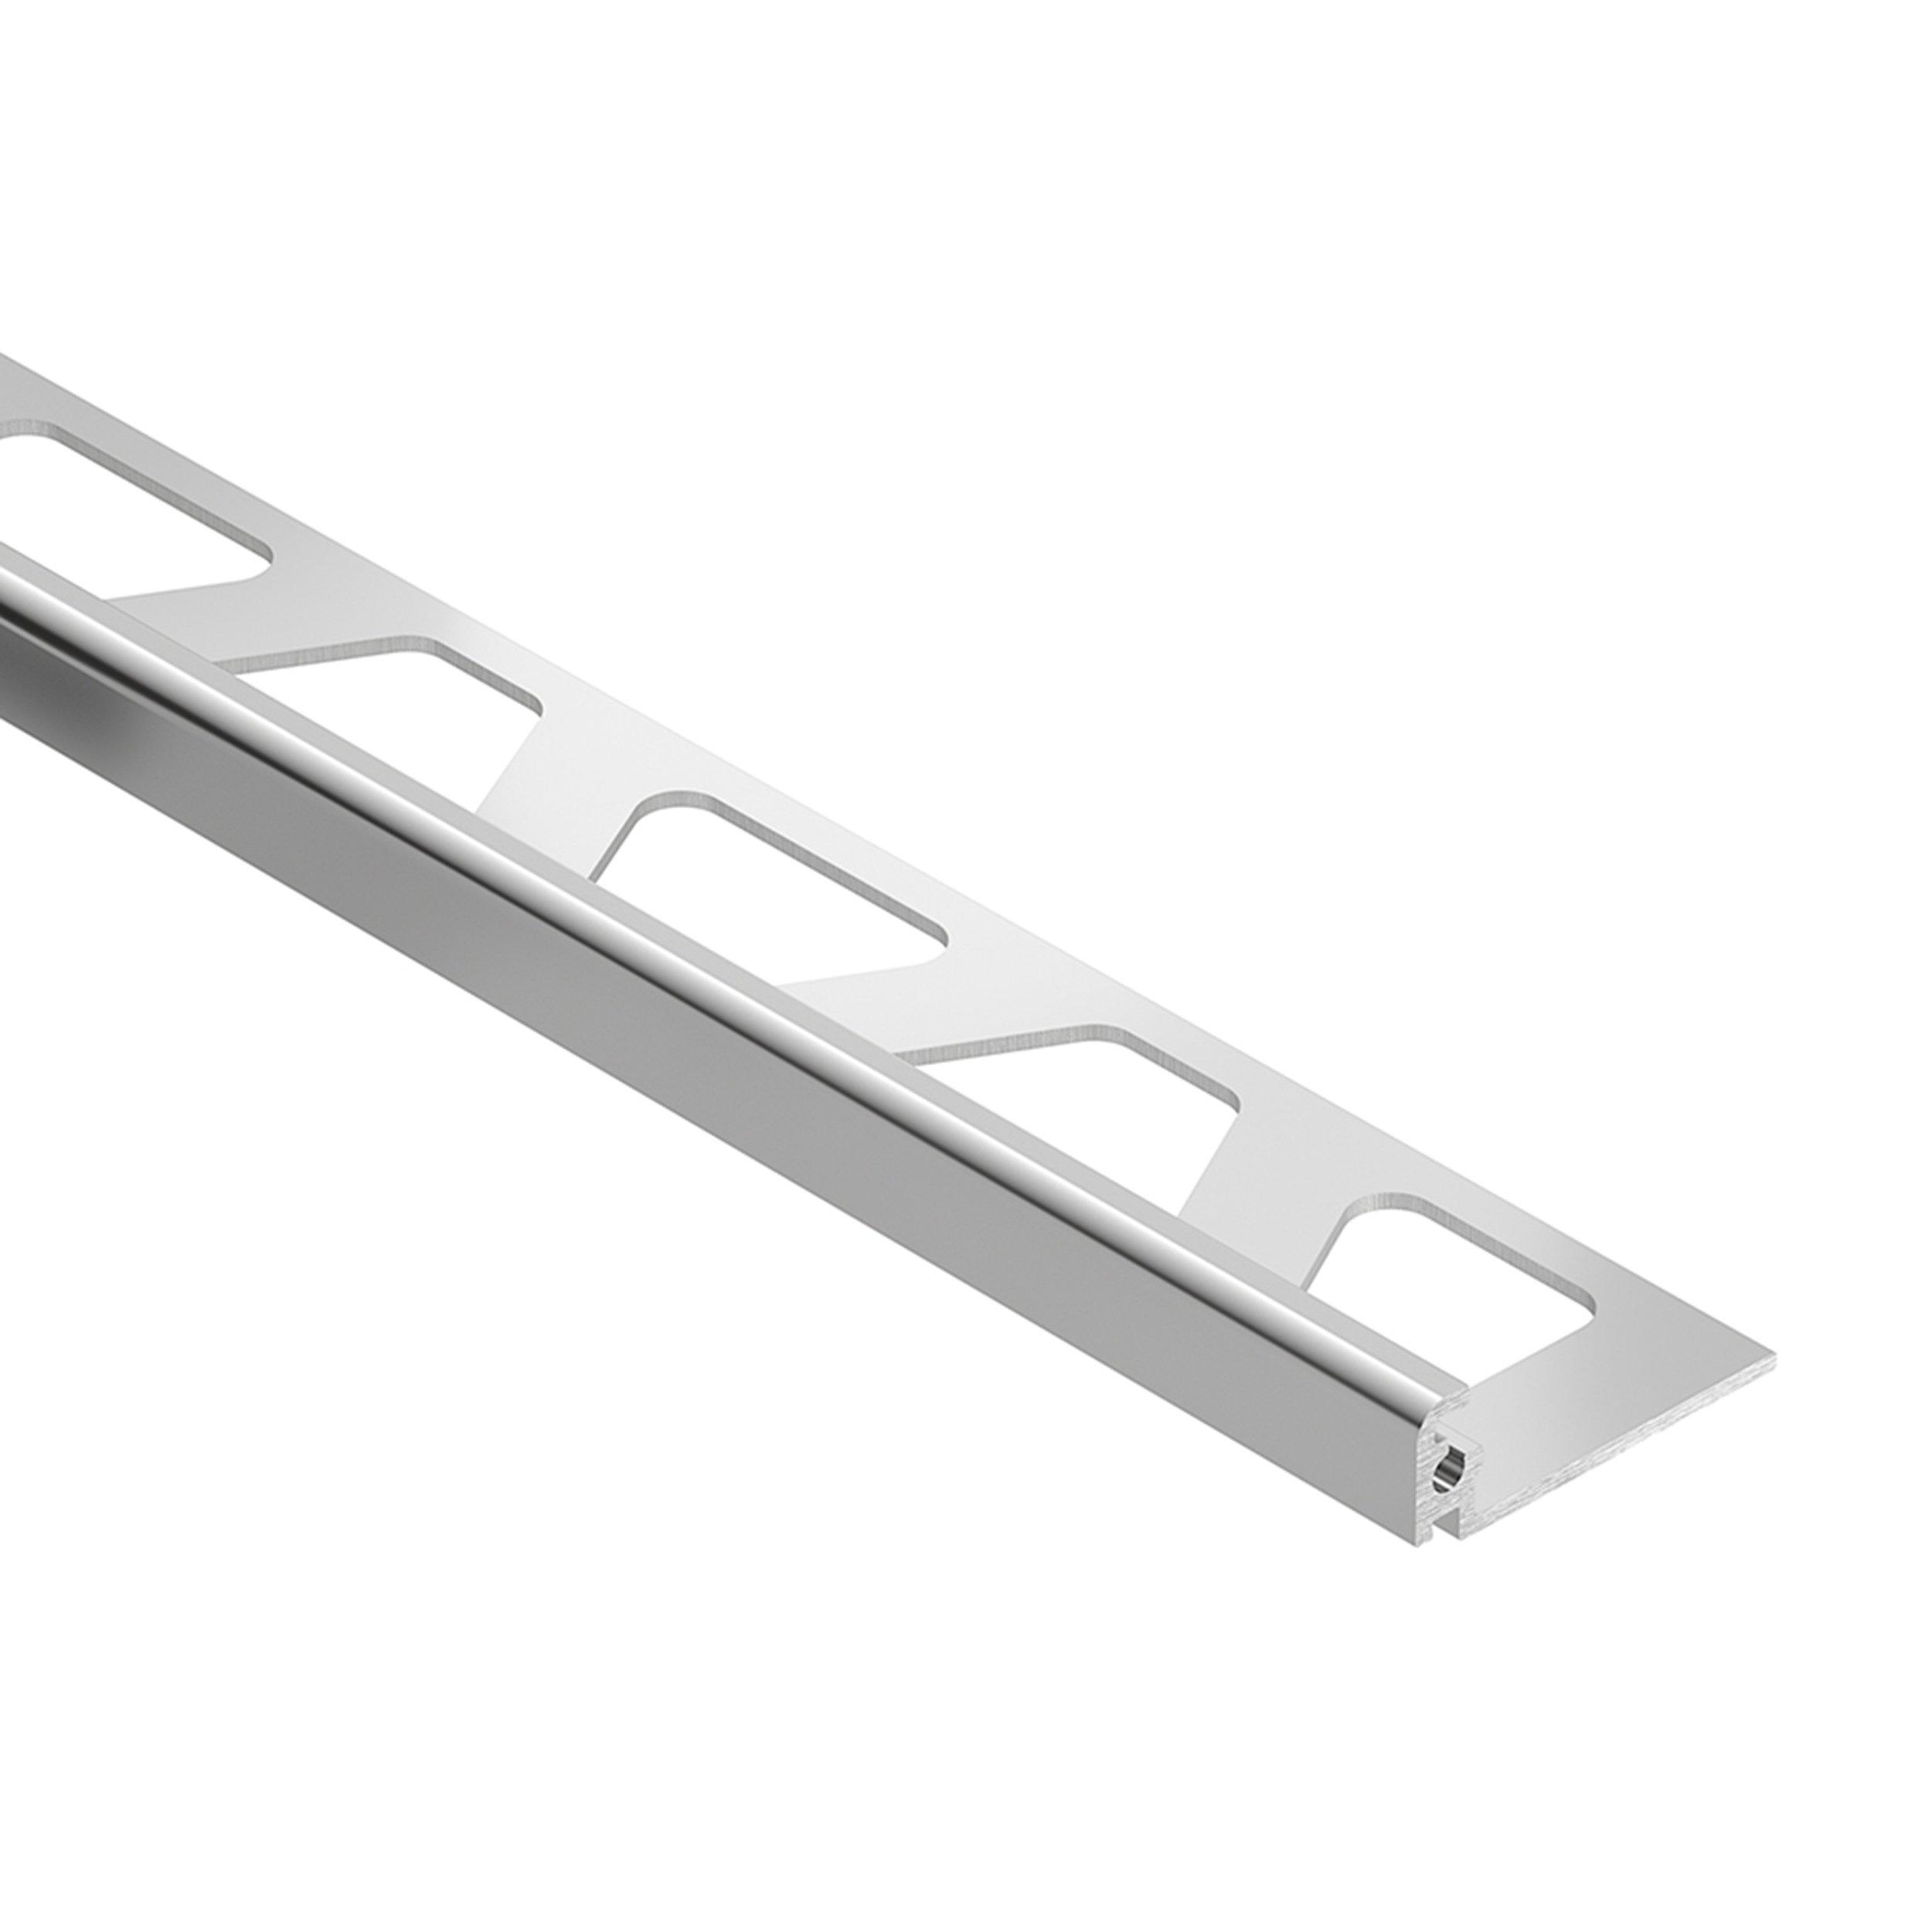 Schluter Jolly Edge Trim 7/16in. Anodized Aluminum Polished Chrome